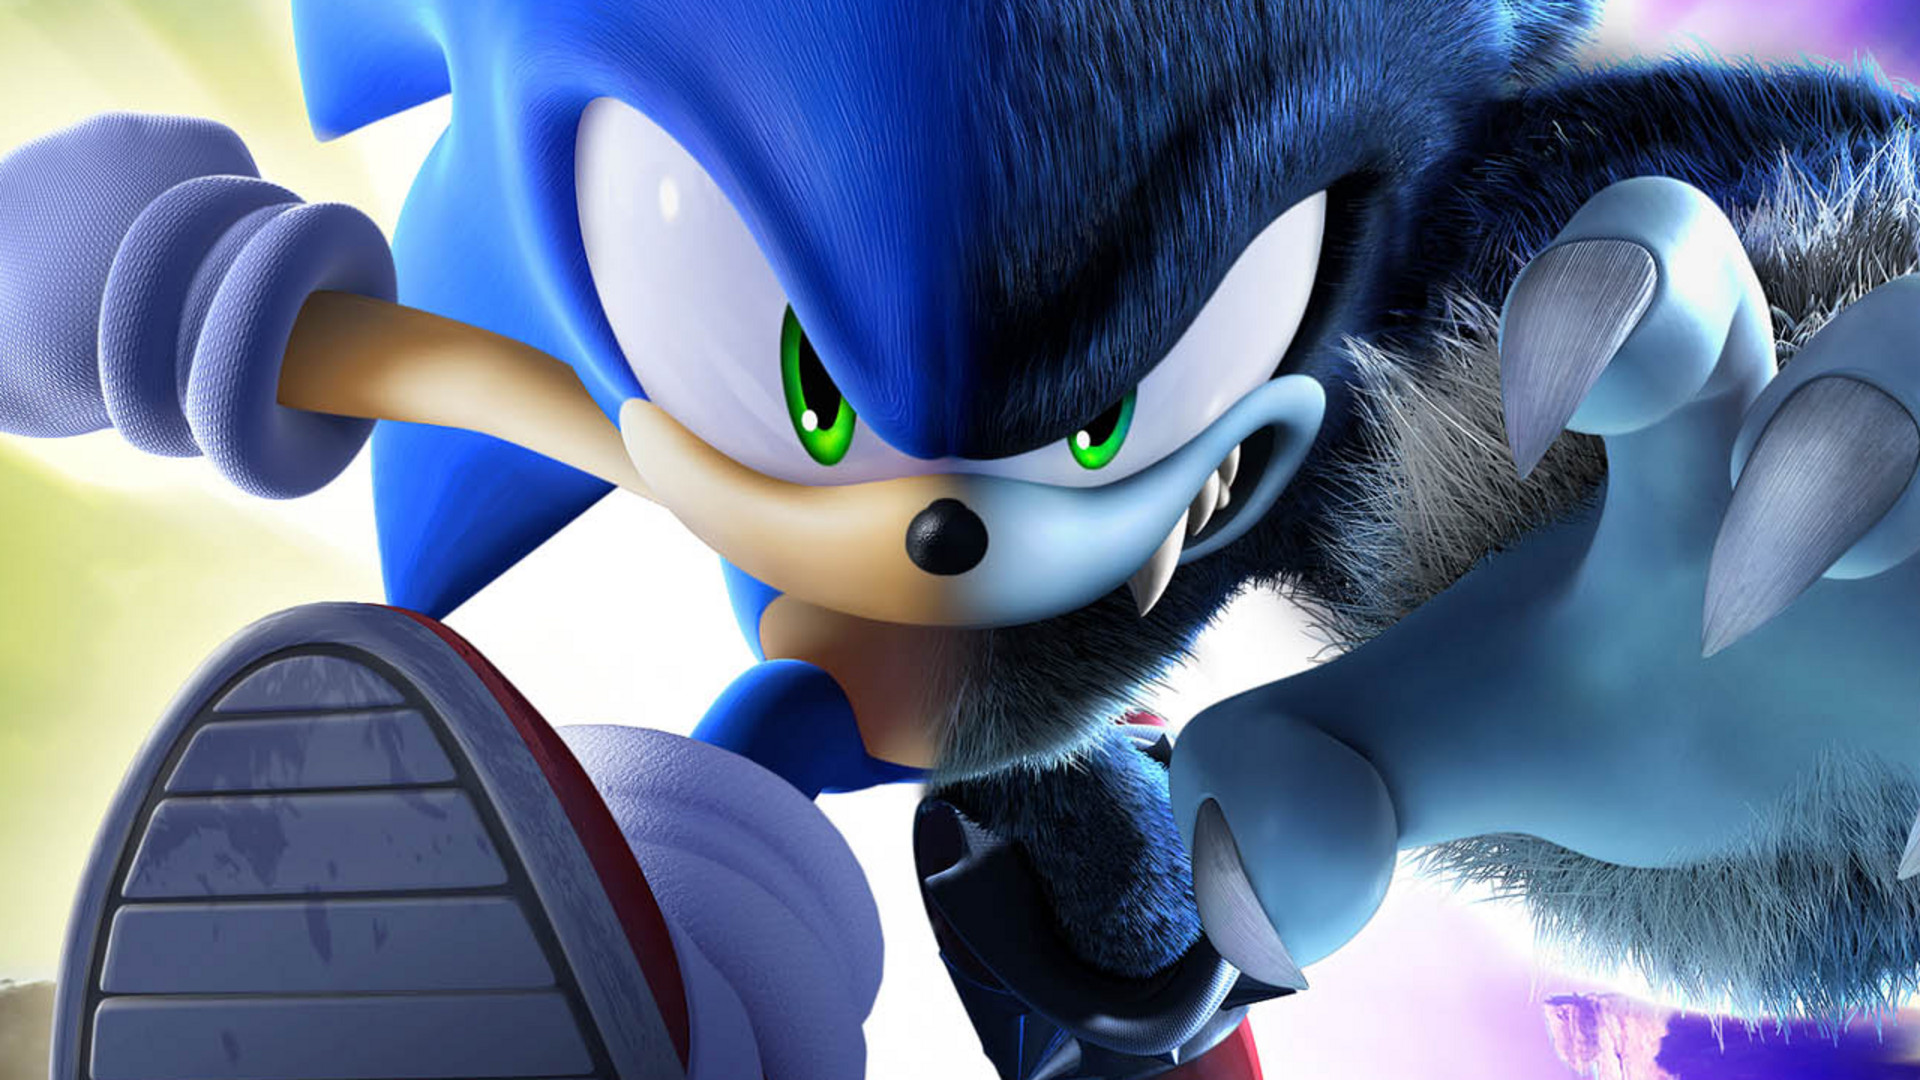 sonic unleashed sonic unleashed pc